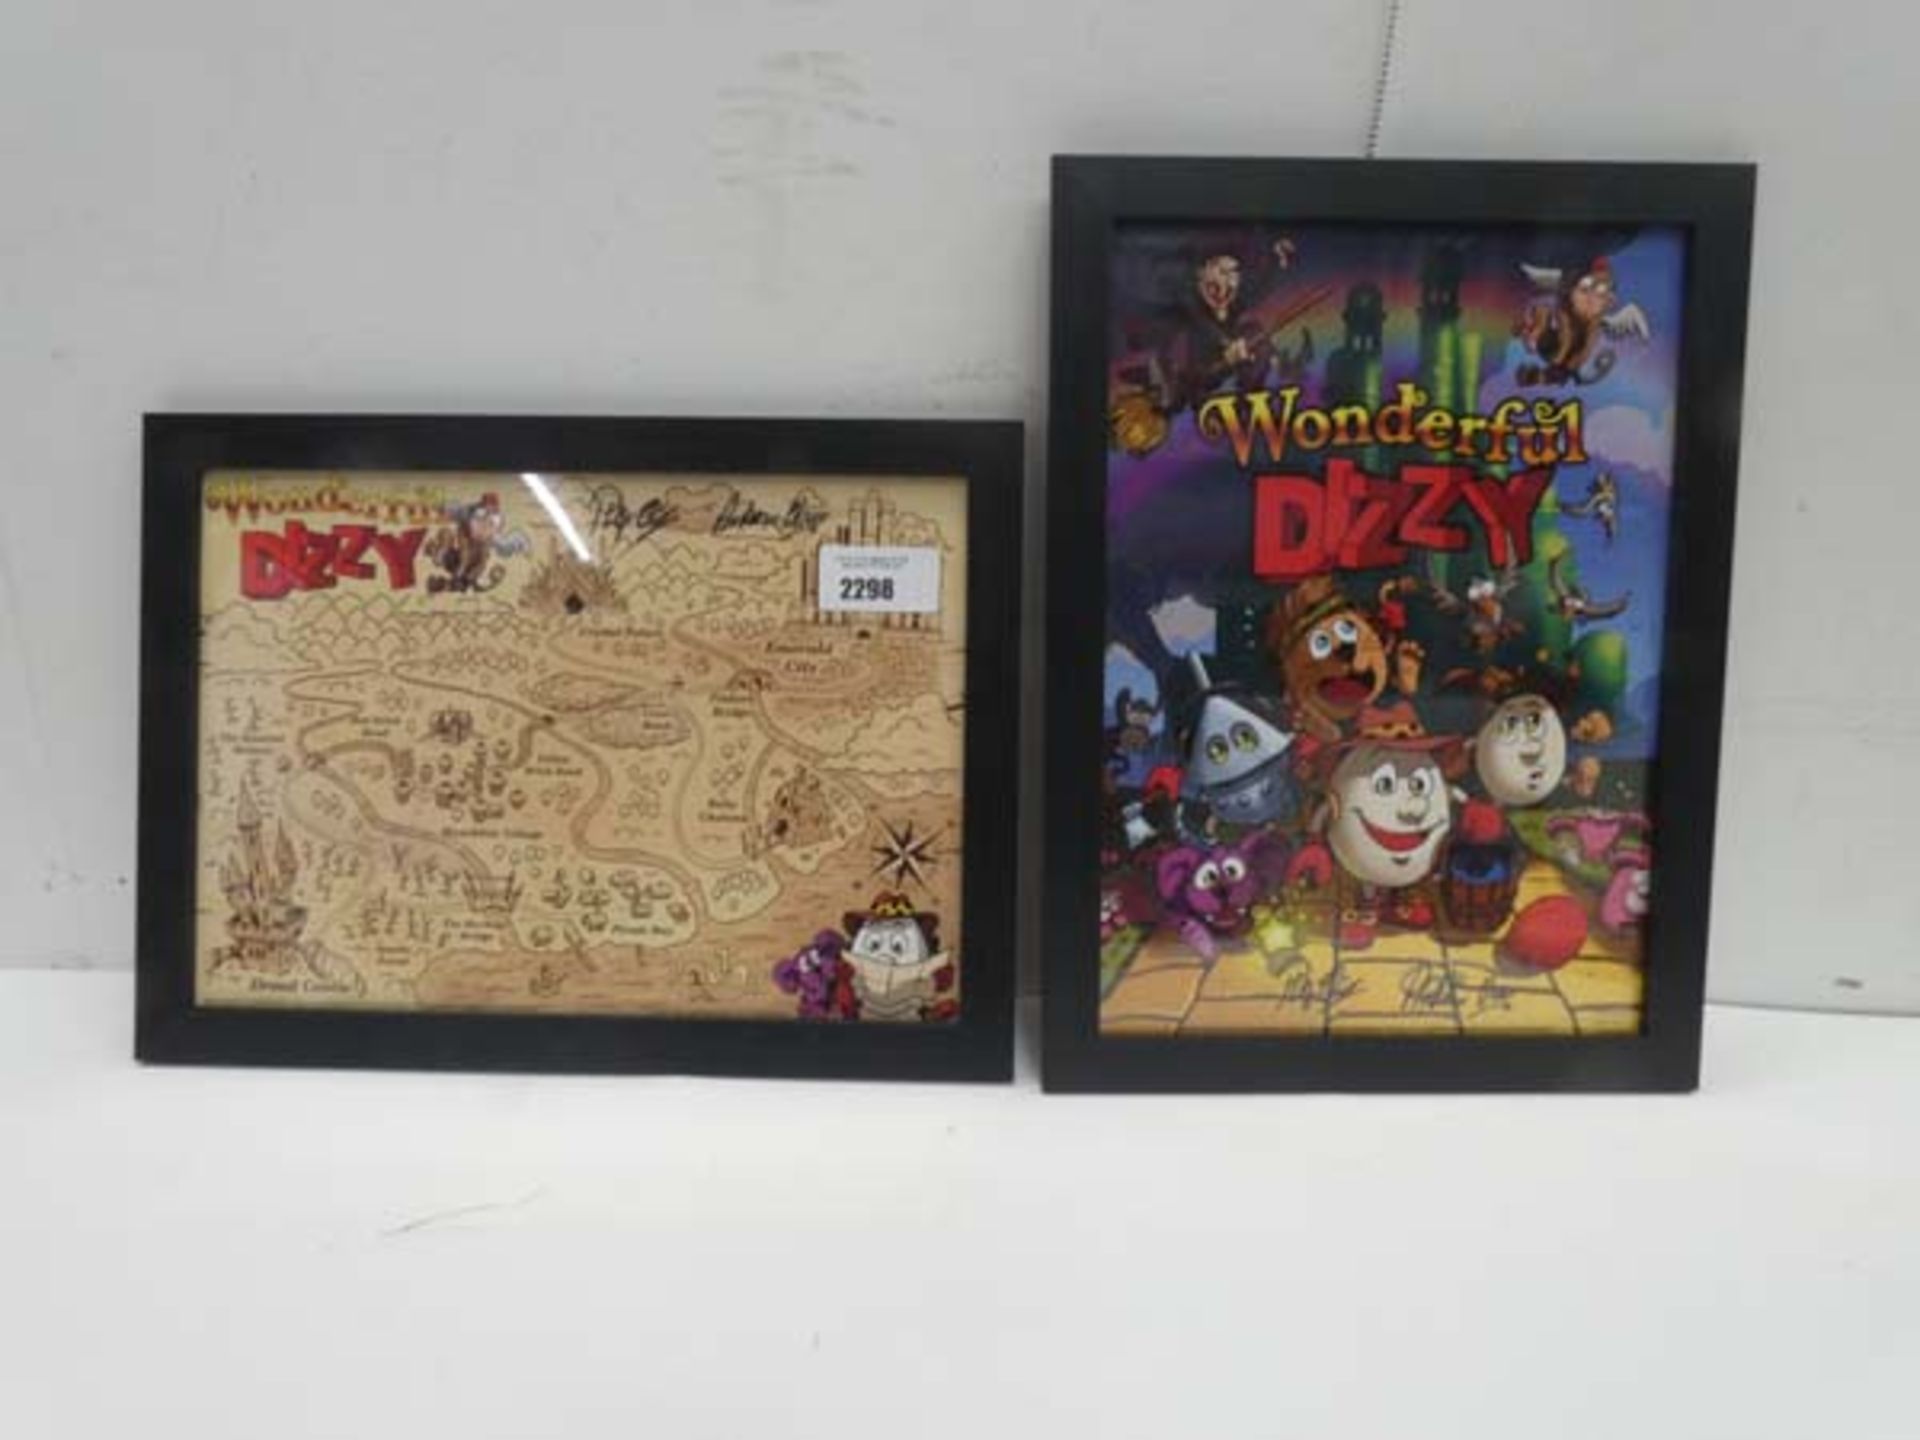 Framed 'Wonderful Dizzy' game poster and map, both bearing signatures (*UNVERIFIED*)